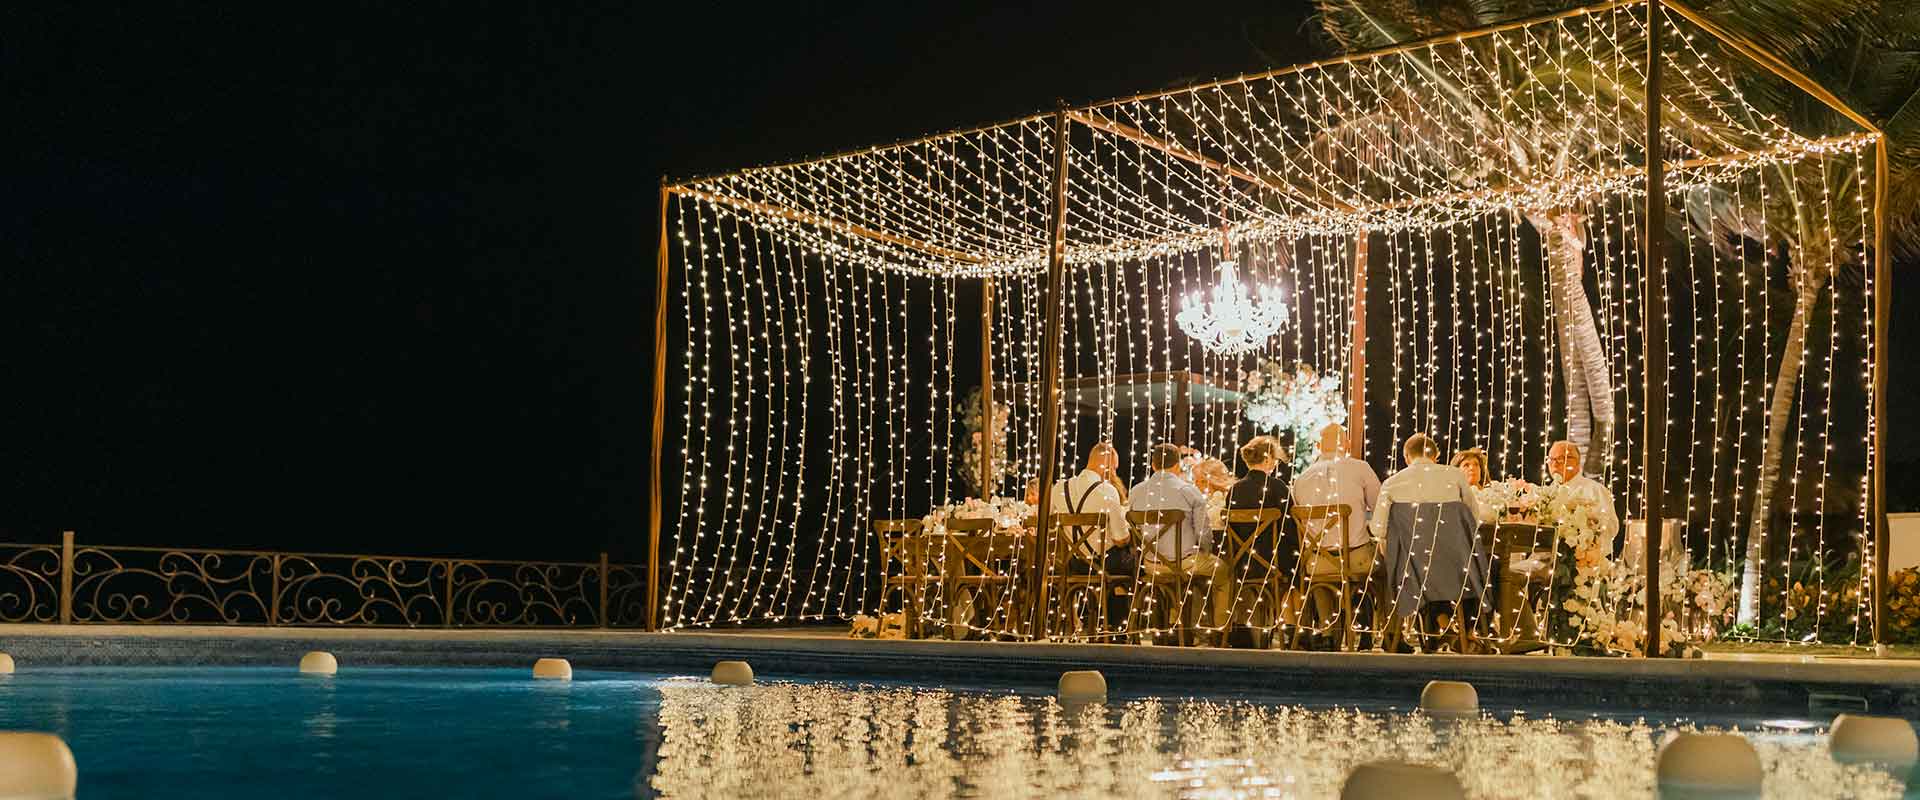 Wedding Services in Cancun and Riviera Maya